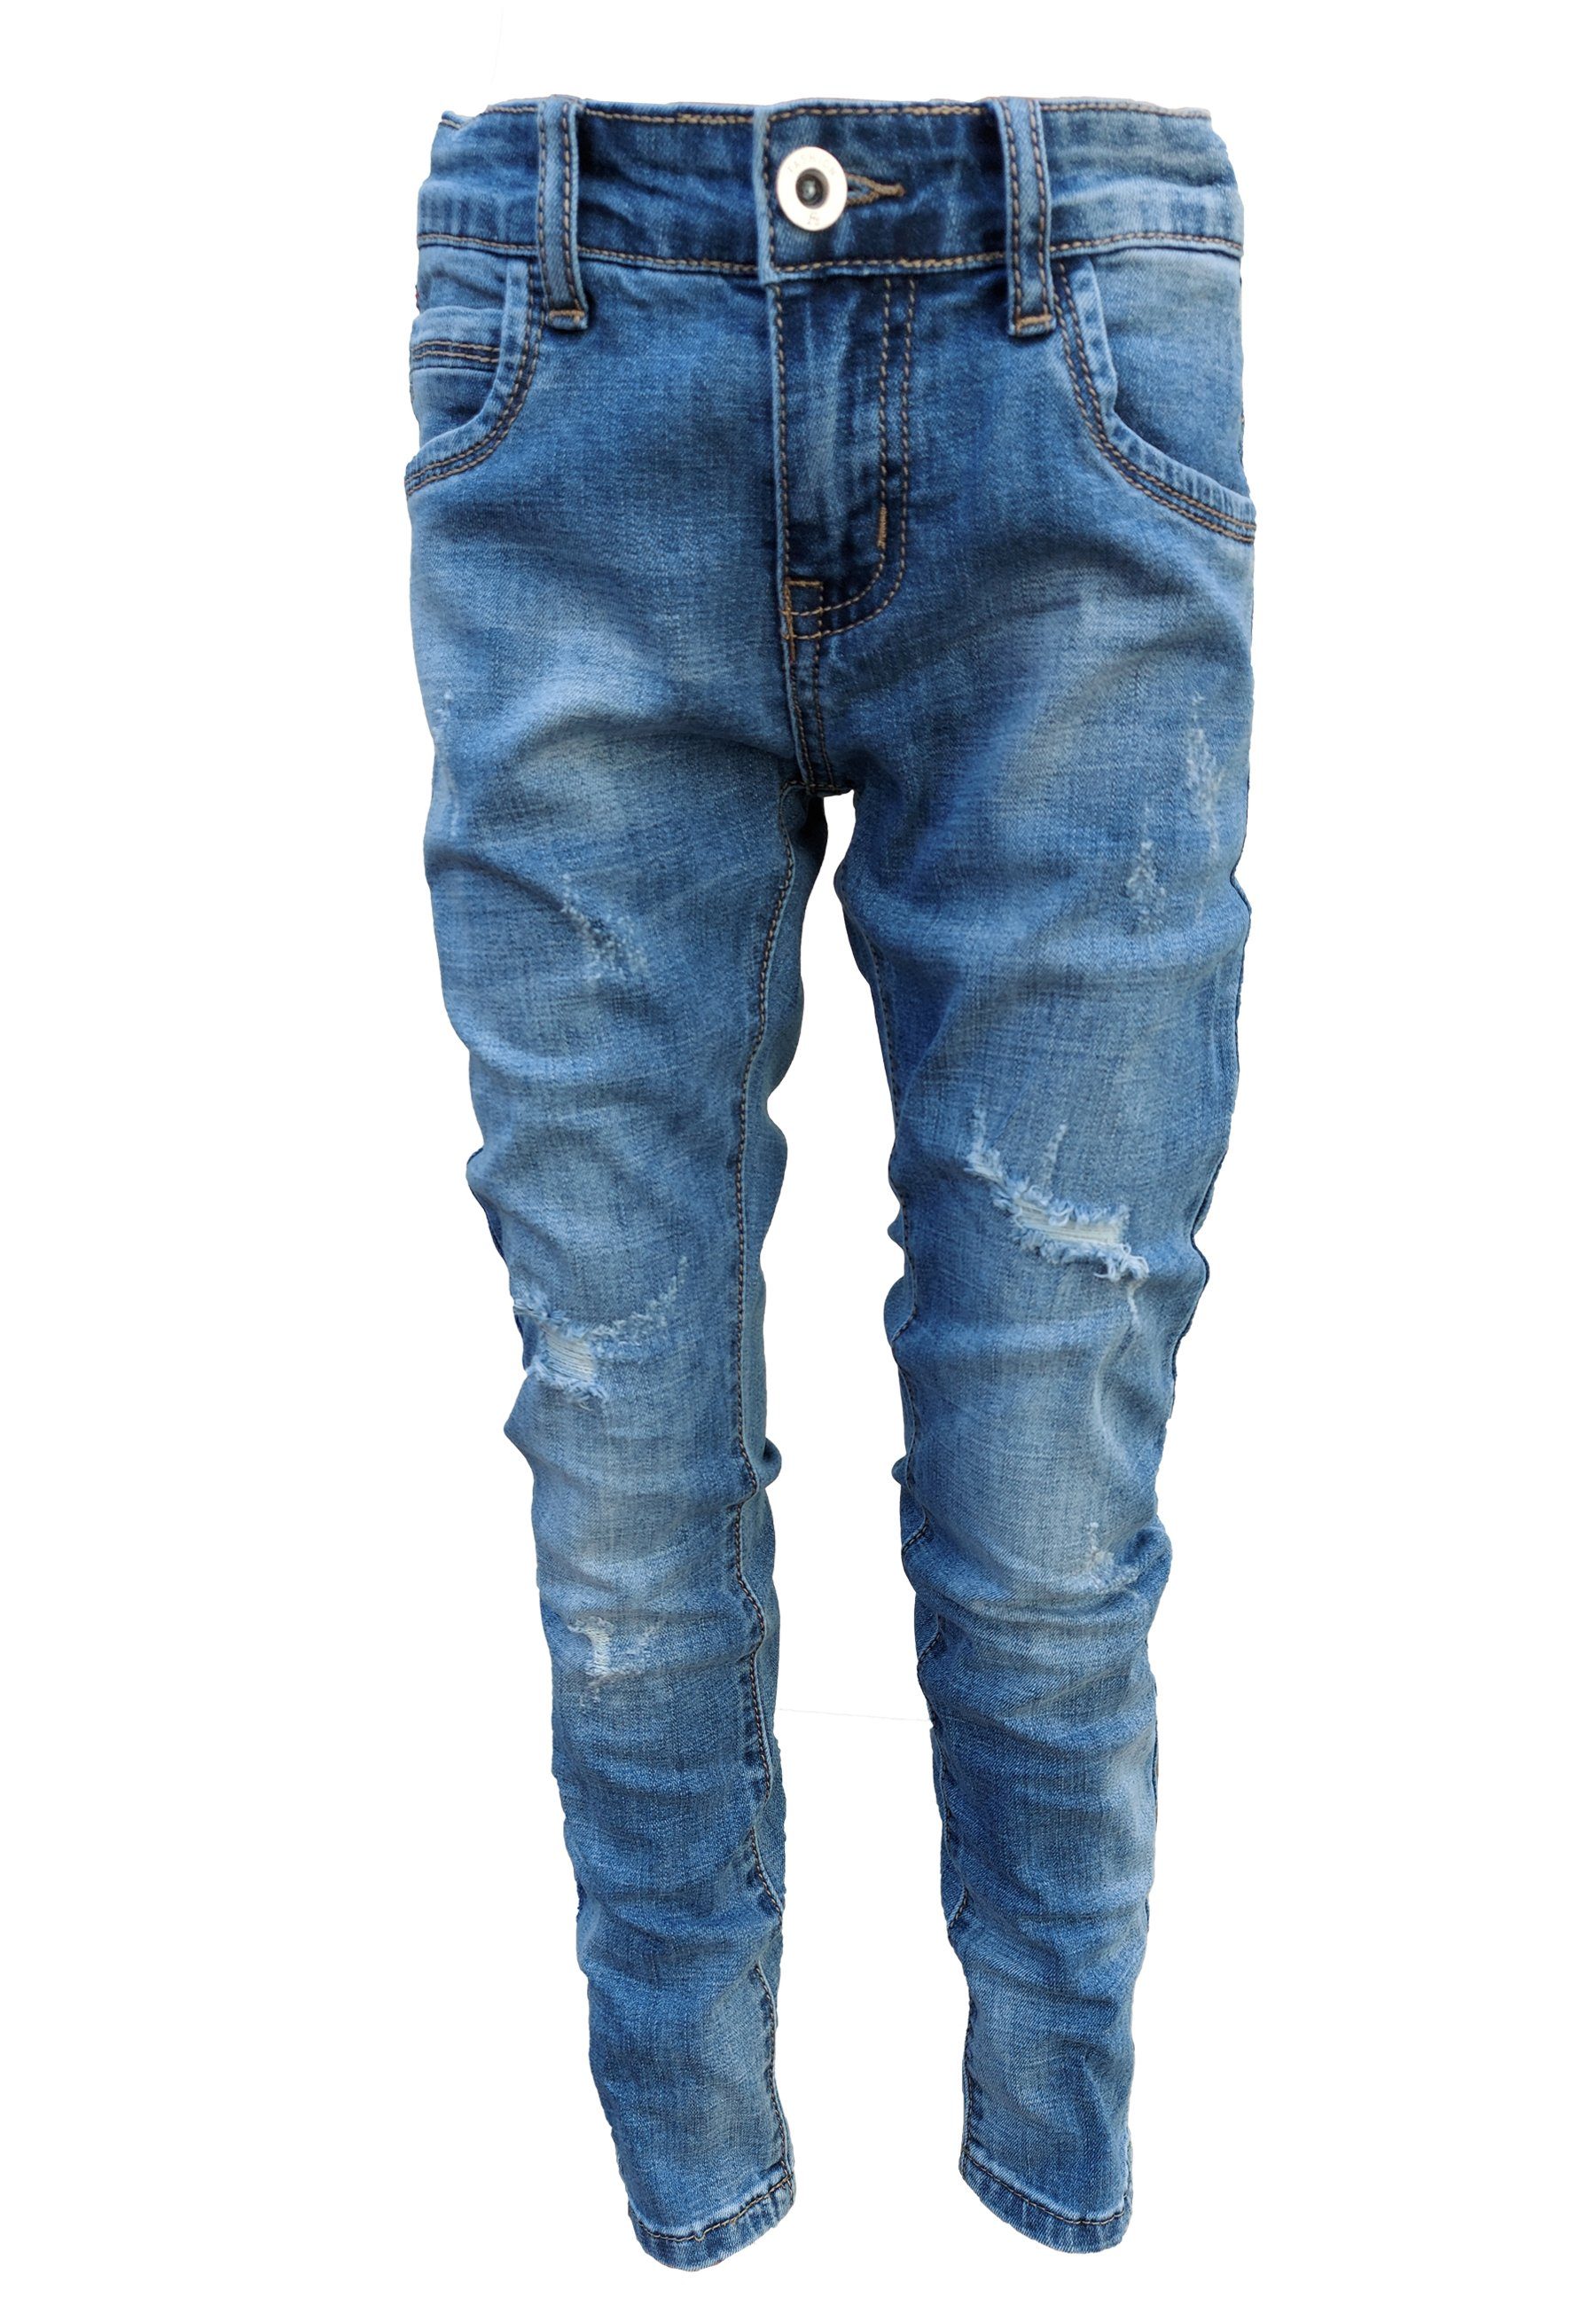 Trends Family Bequeme Destroyed-Look im Jeans